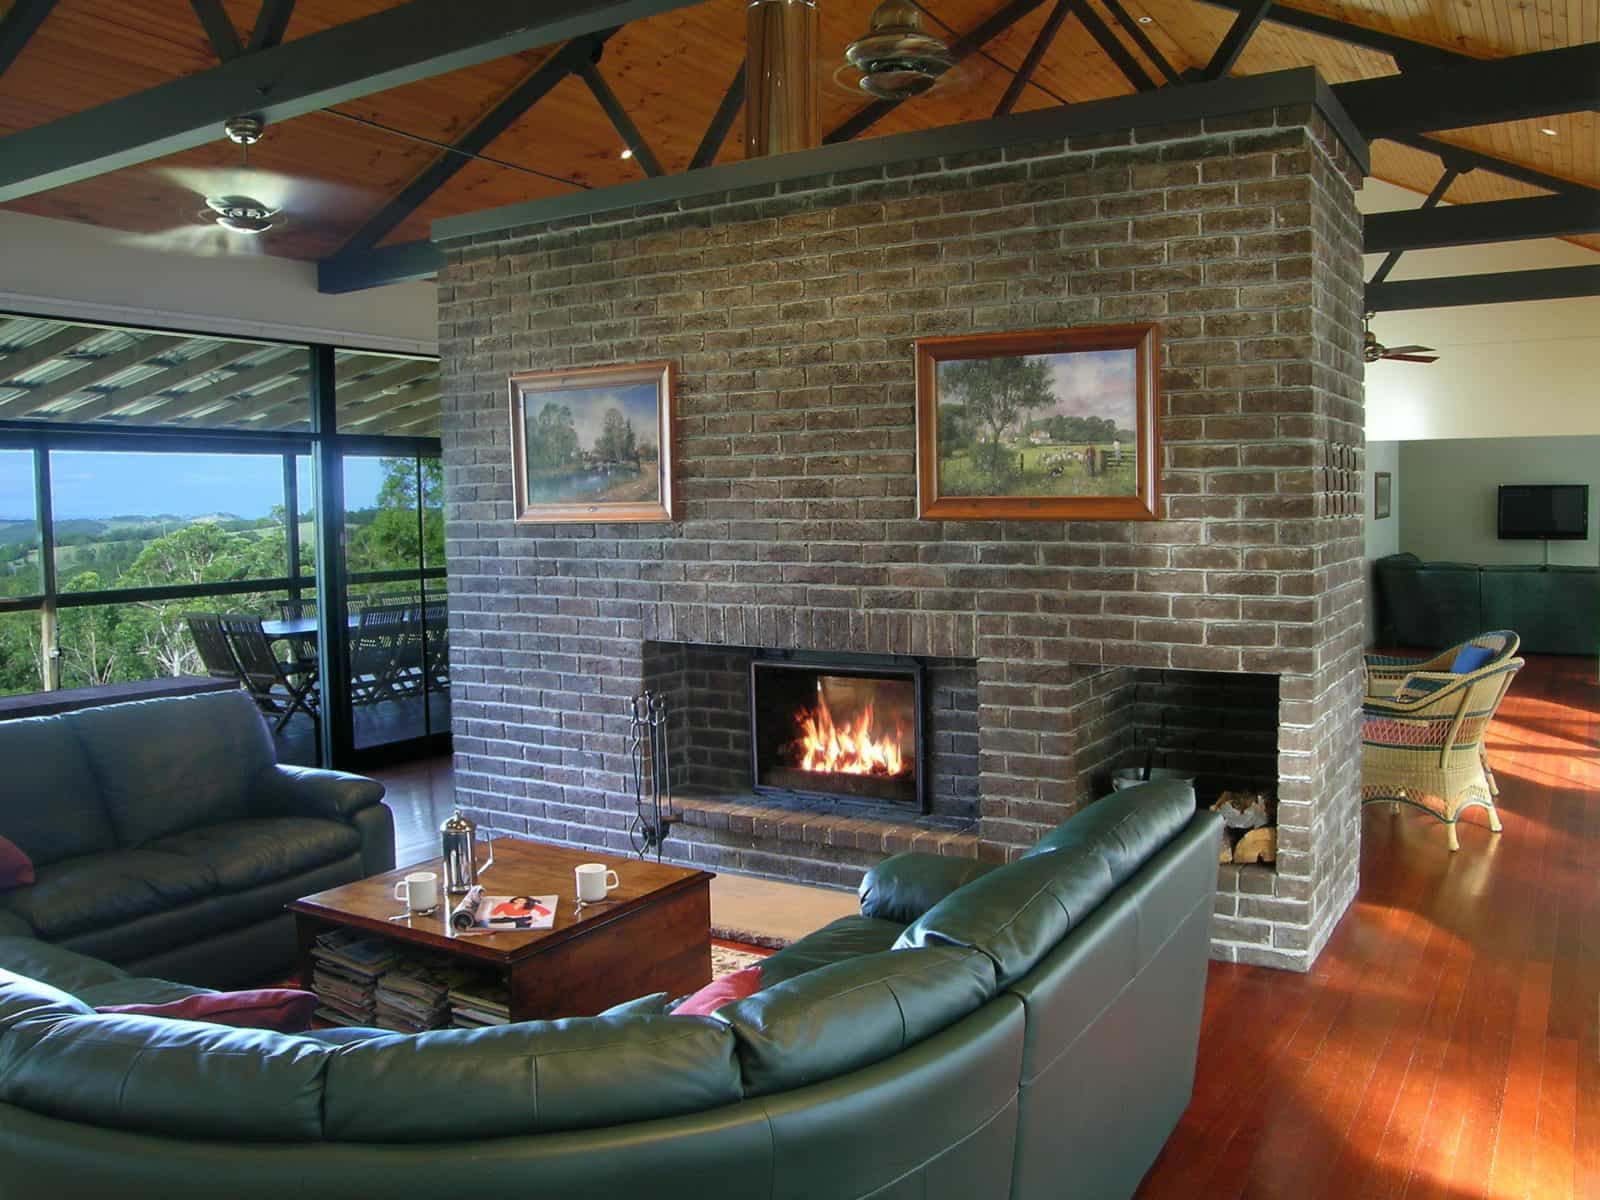 Doubled-sided fireplace